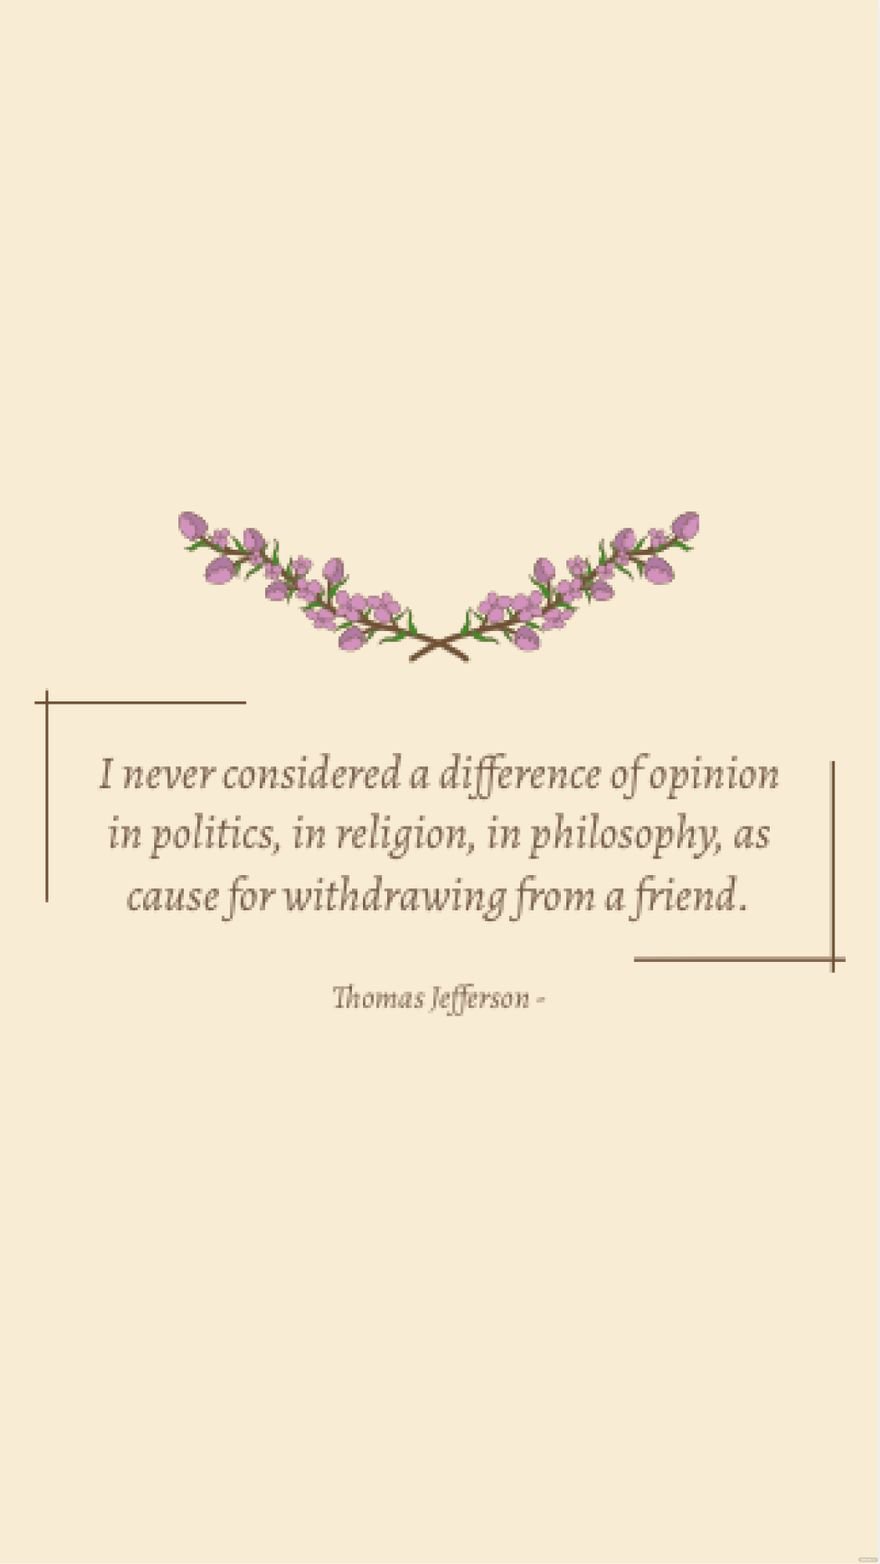 Thomas Jefferson - I never considered a difference of opinion in politics, in religion, in philosophy, as cause for withdrawing from a friend.